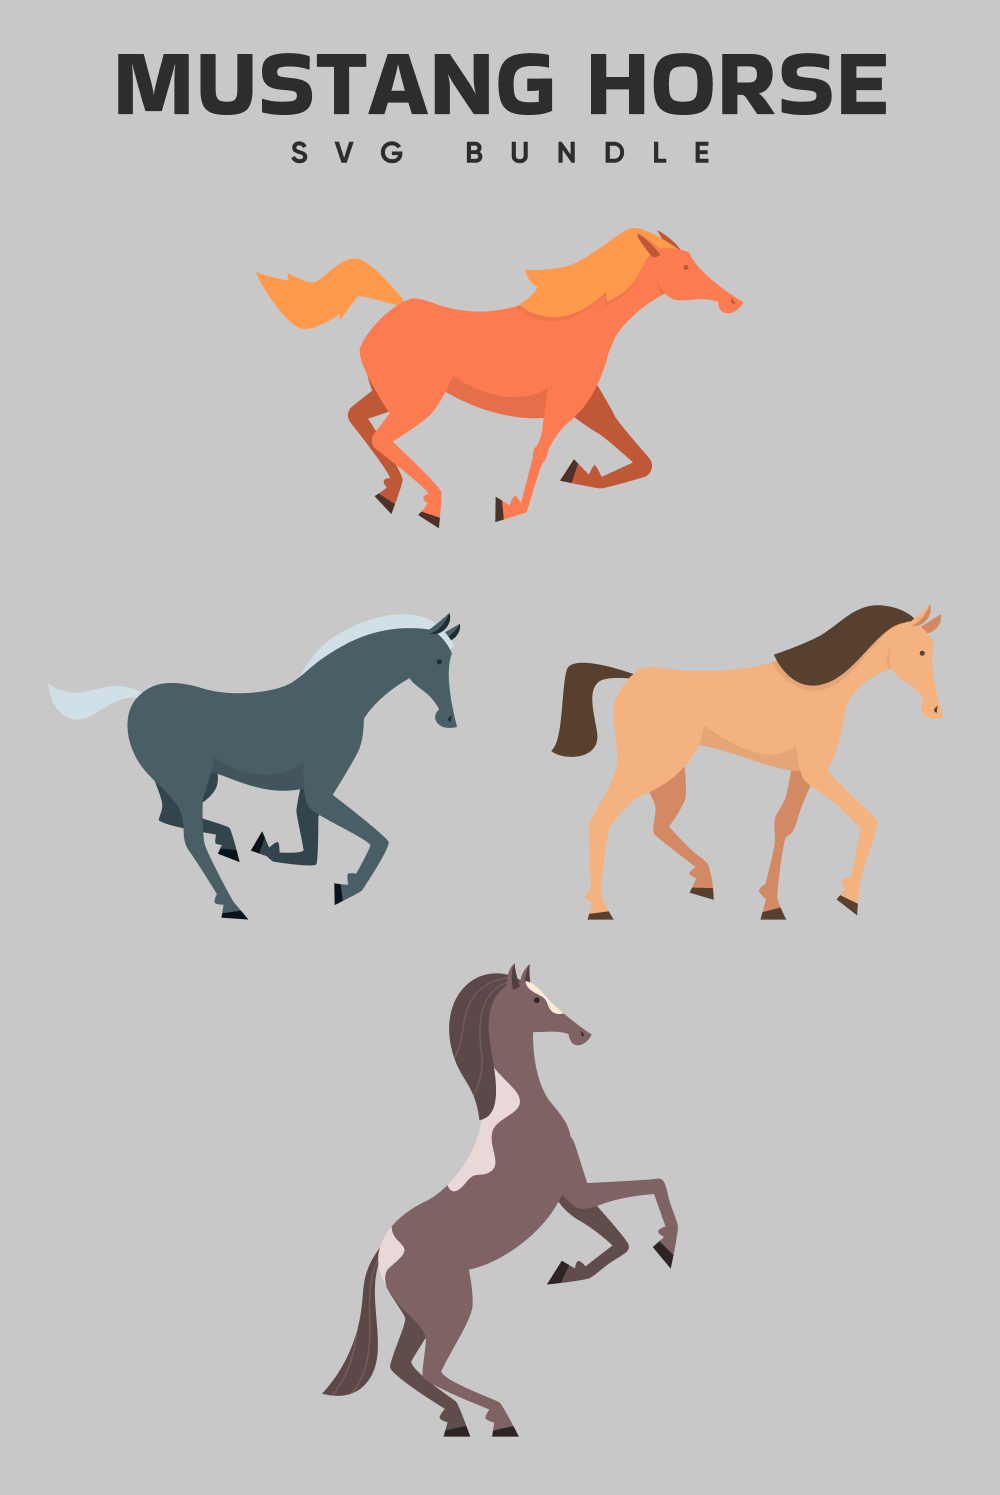 Three horses are shown in three different colors.